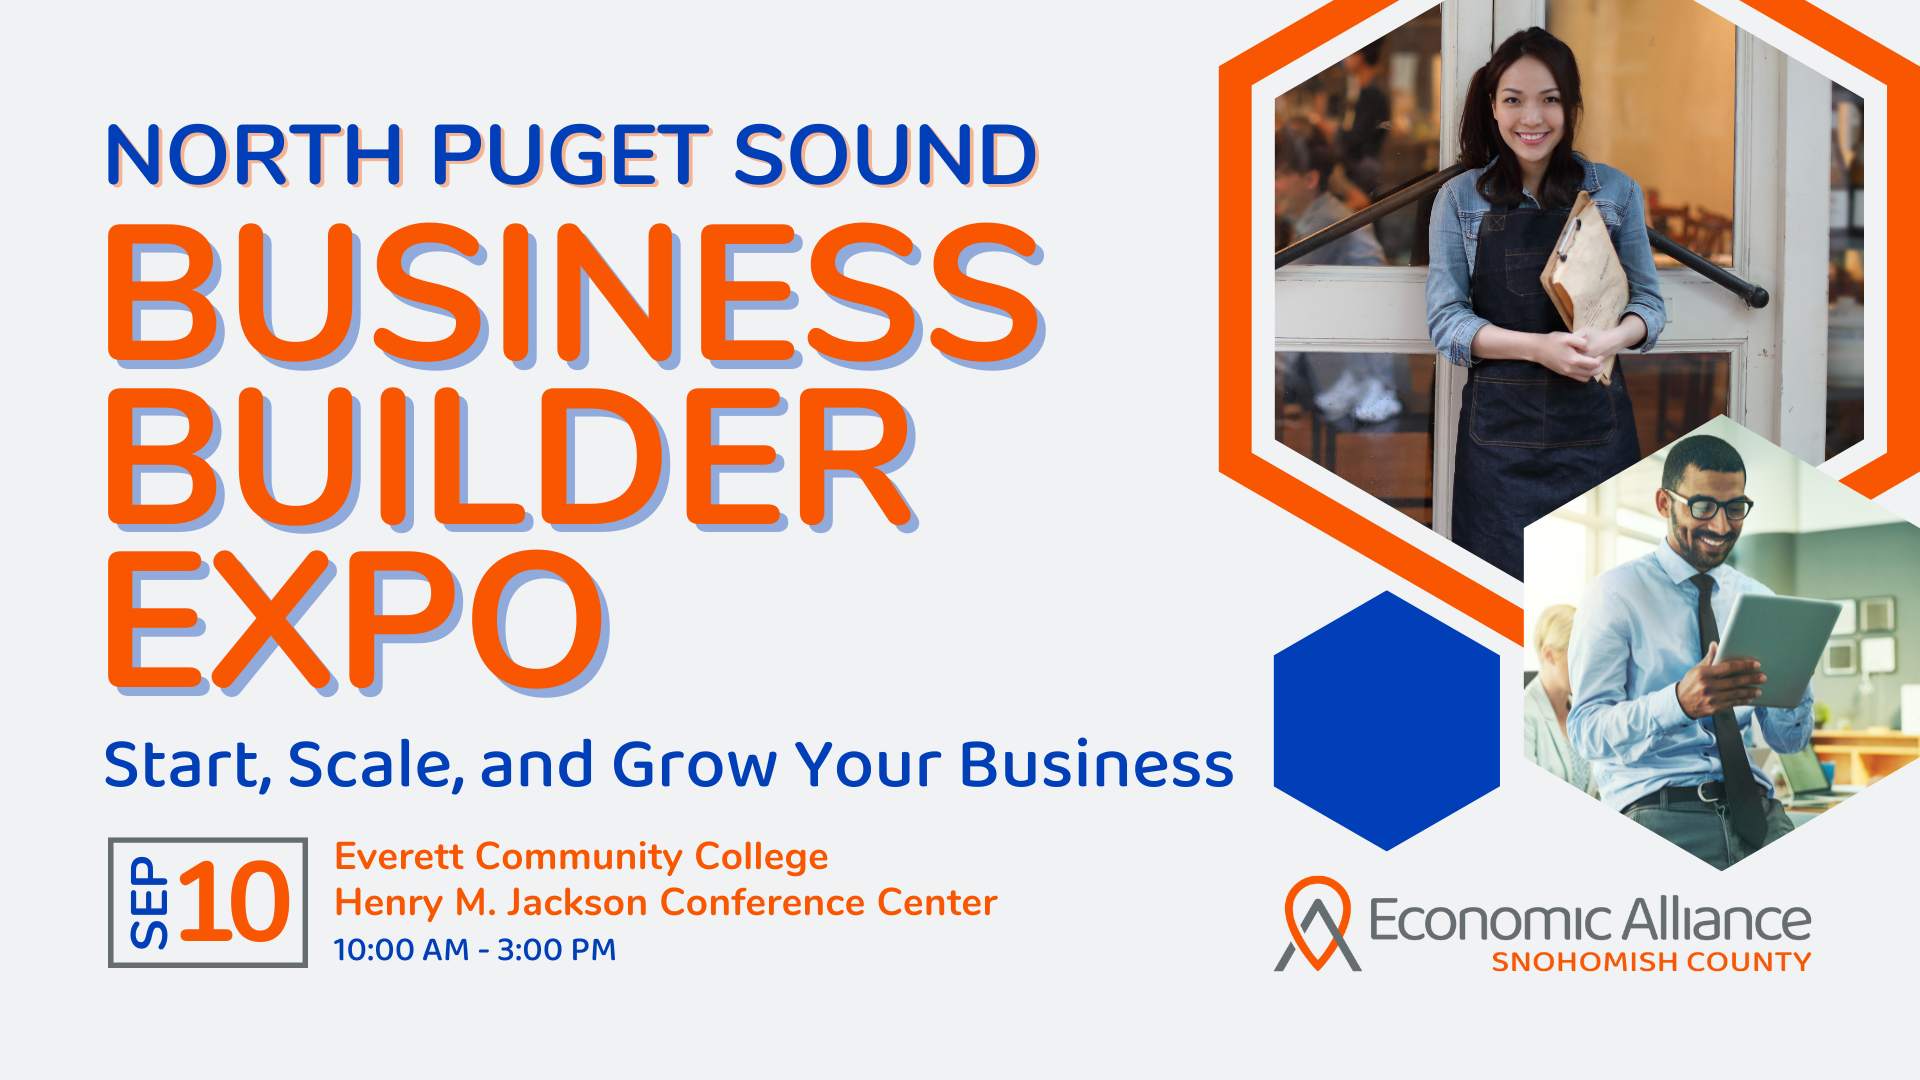 Event Promo Photo For North Puget Sound Business Builder Expo